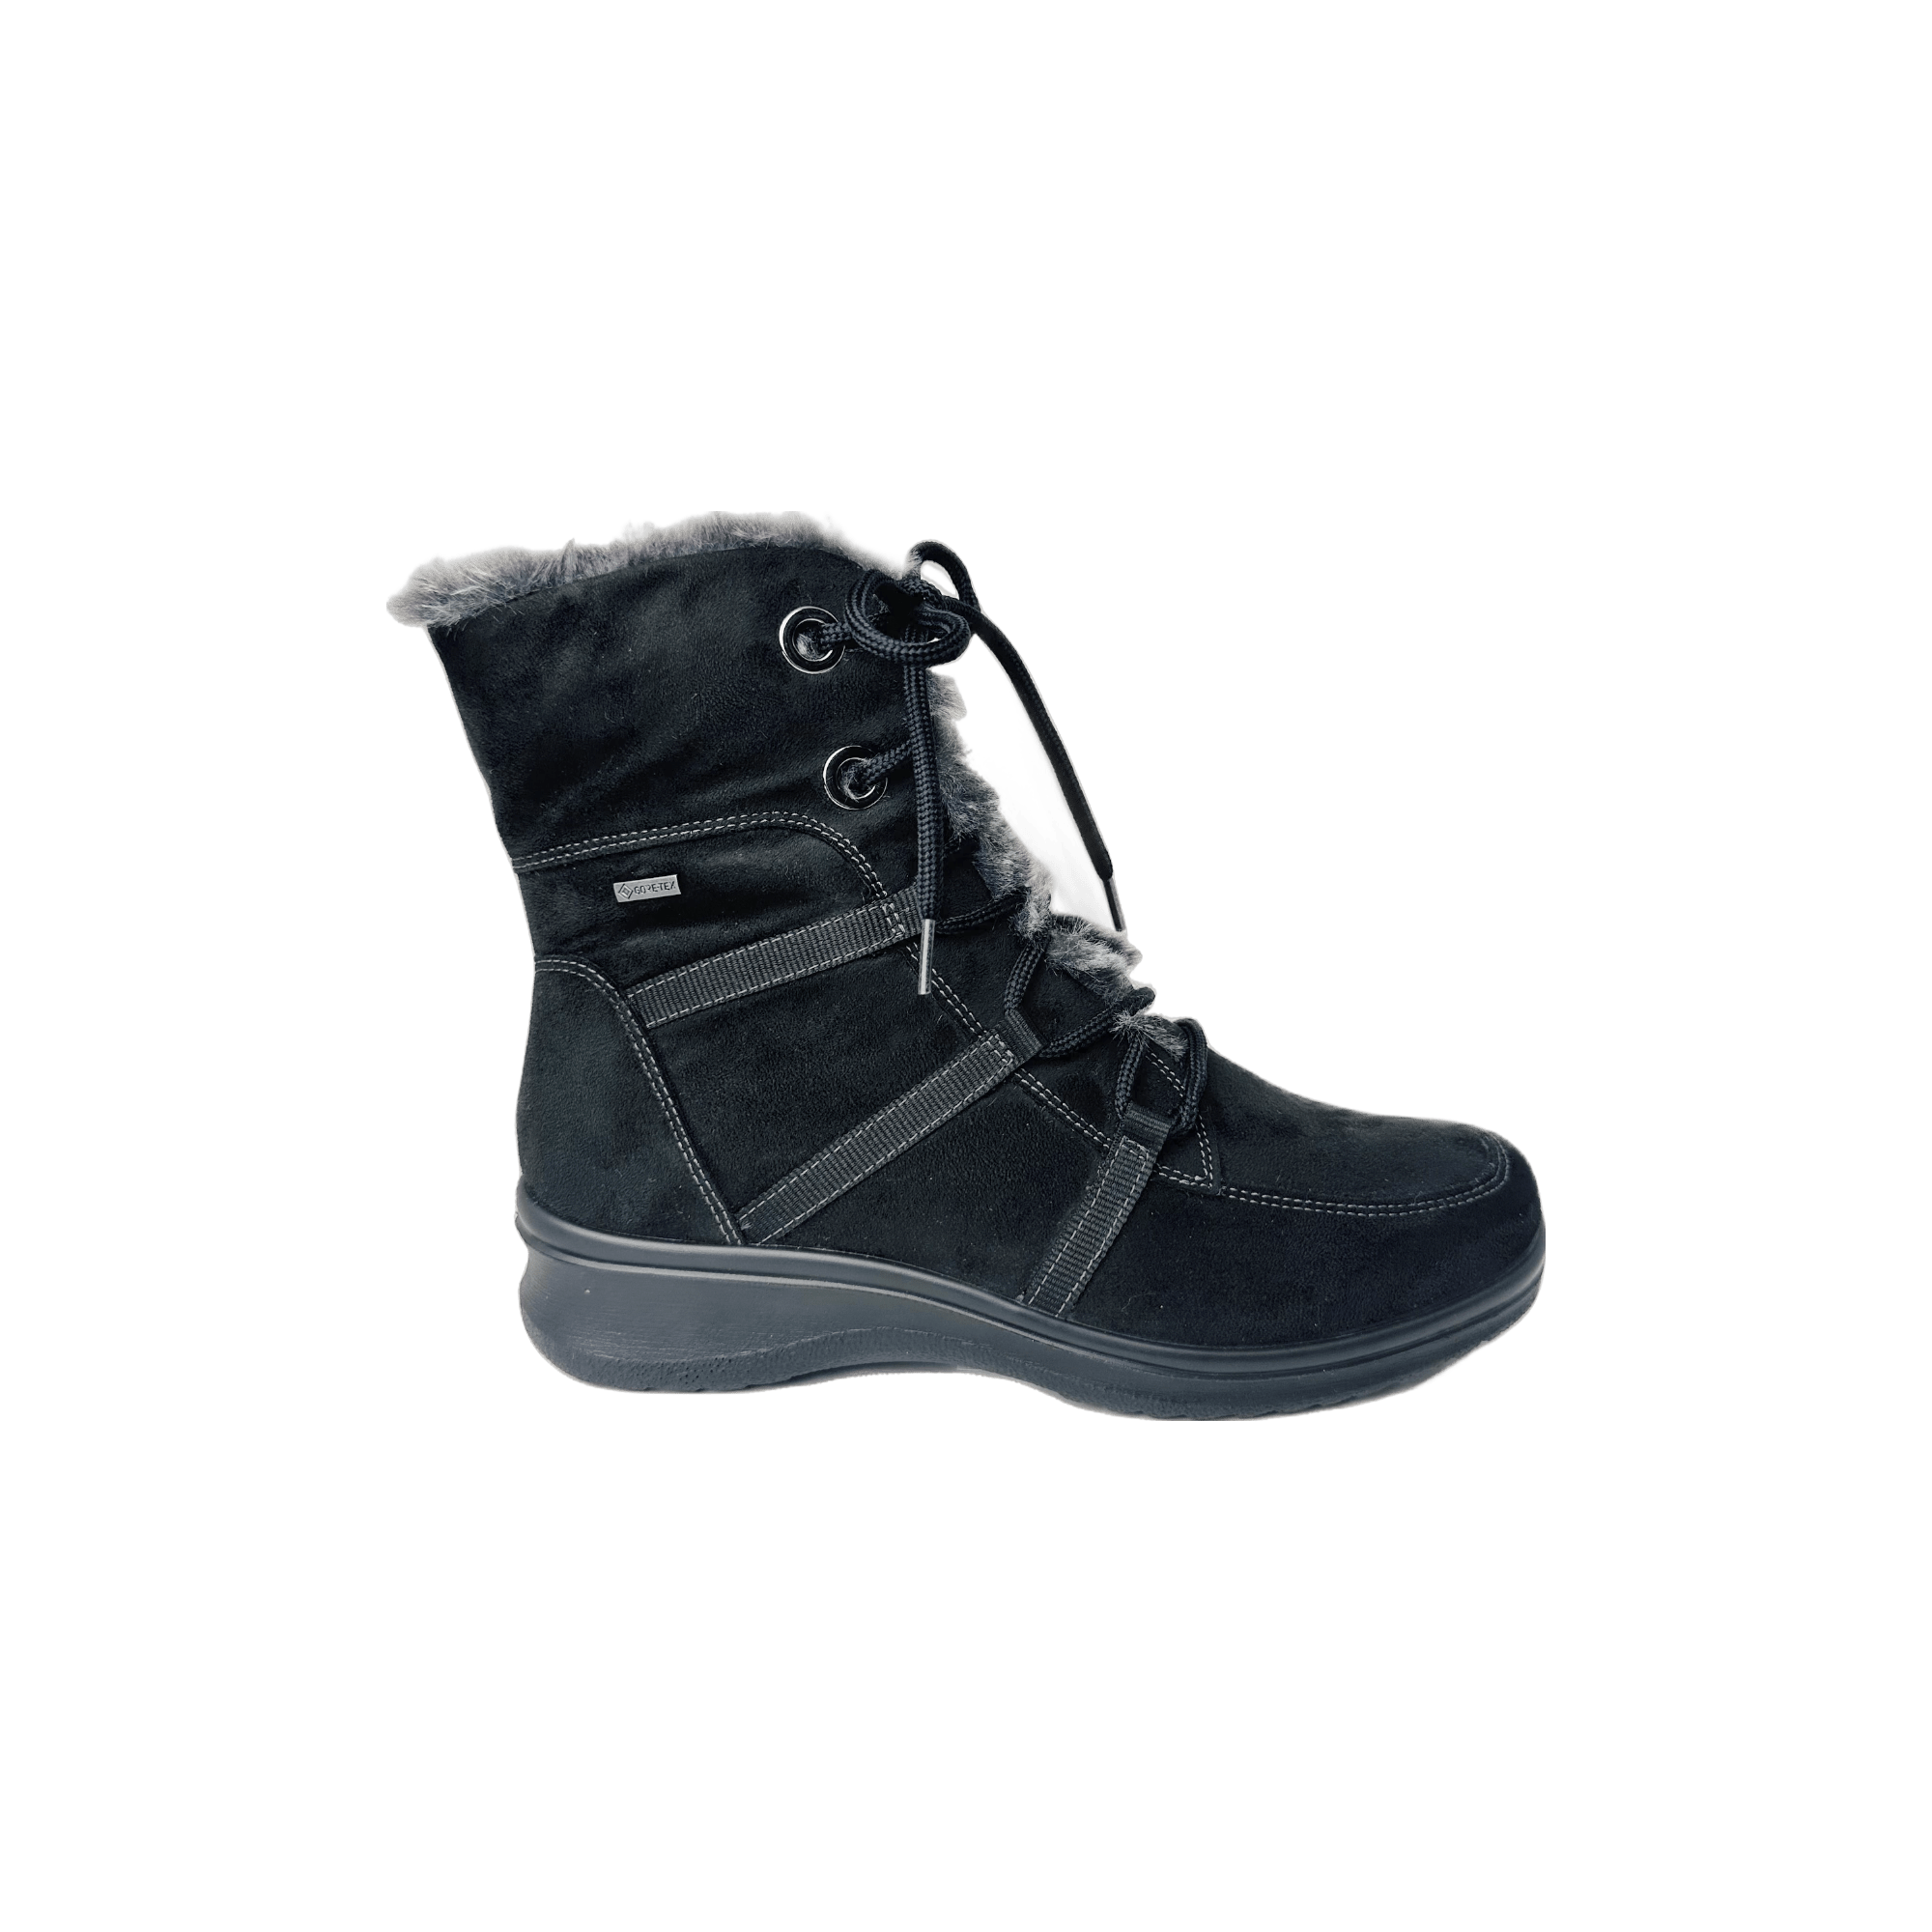 Ara Boots 6 / montreal-black / 2 inches Montreal-Black